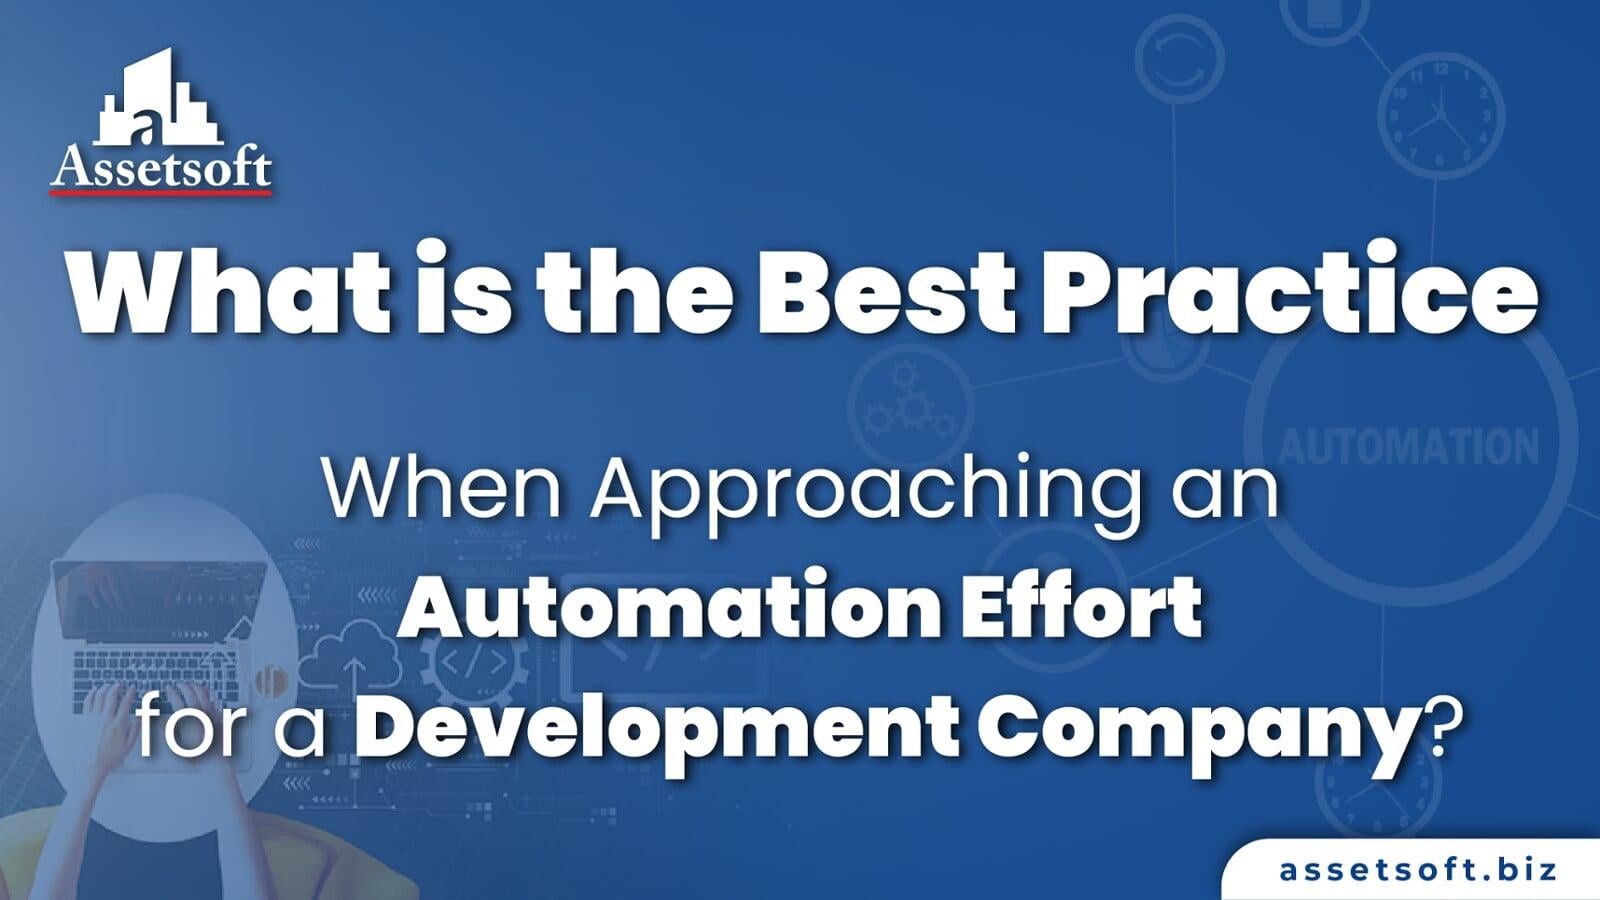 What is the Best Practice When Approaching an Automation Effort for a Development Company? 